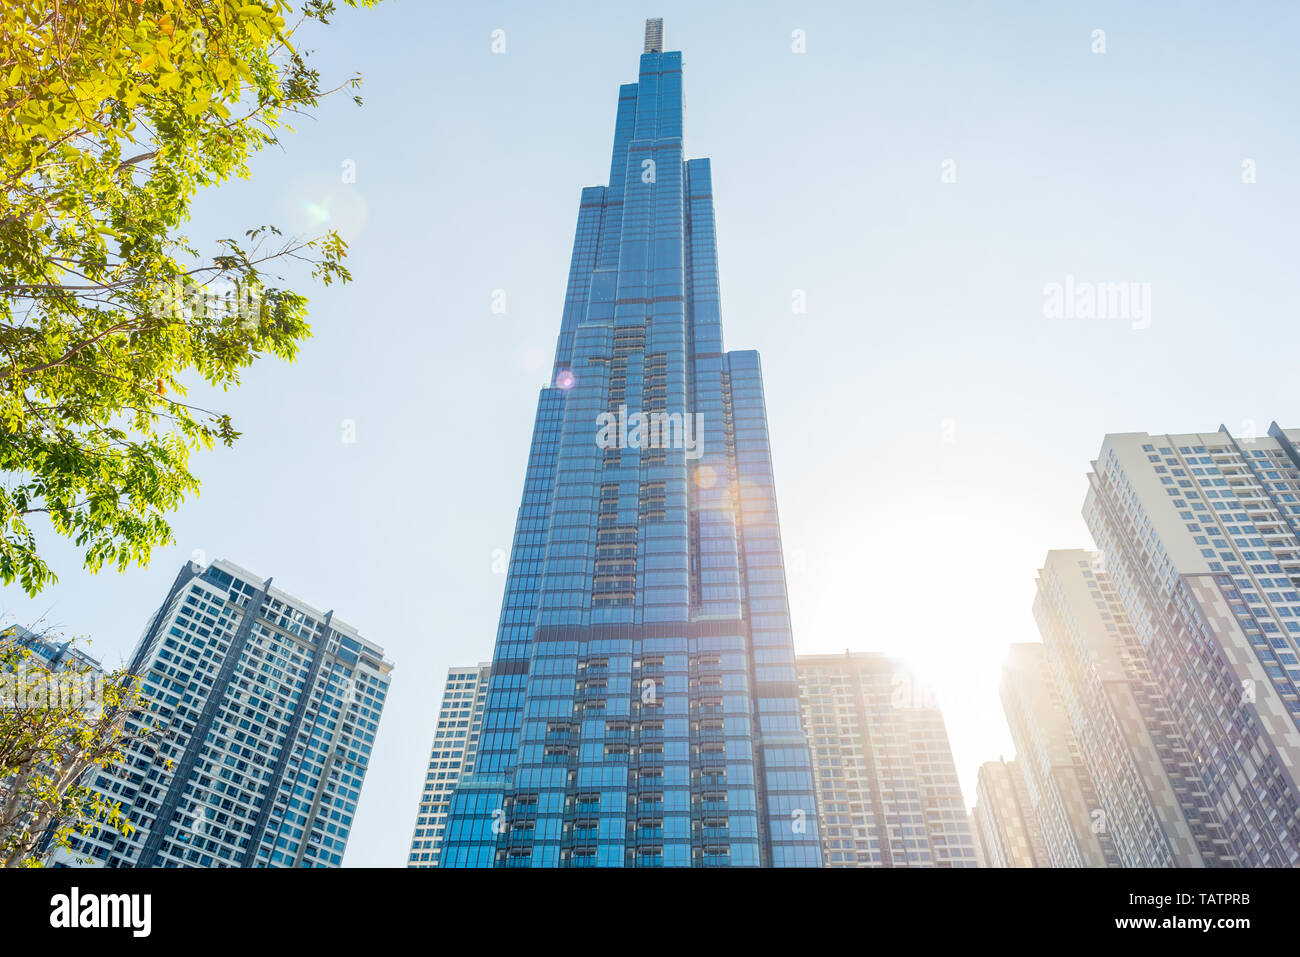 Ho Chi Minh City, Vietnam - February 19, 2019: Landmark 81 and other Vinhomes Central Park high-rise buildings, with the sun shining and lens flares. Stock Photo